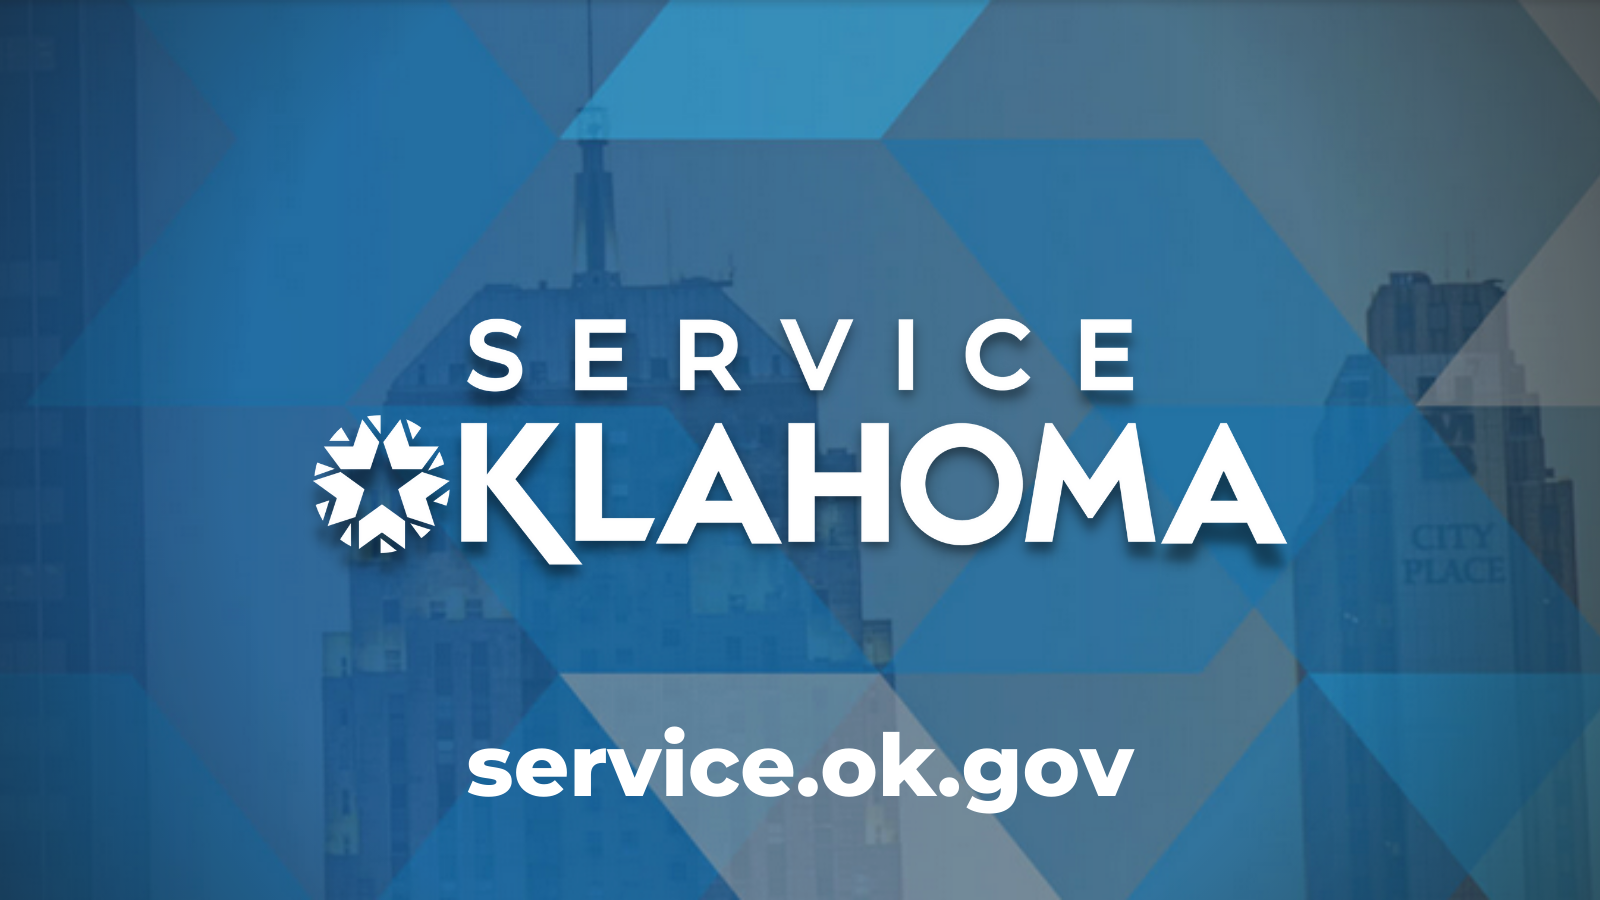 Service Oklahoma is starting to make it easier to find government information and services. - 3